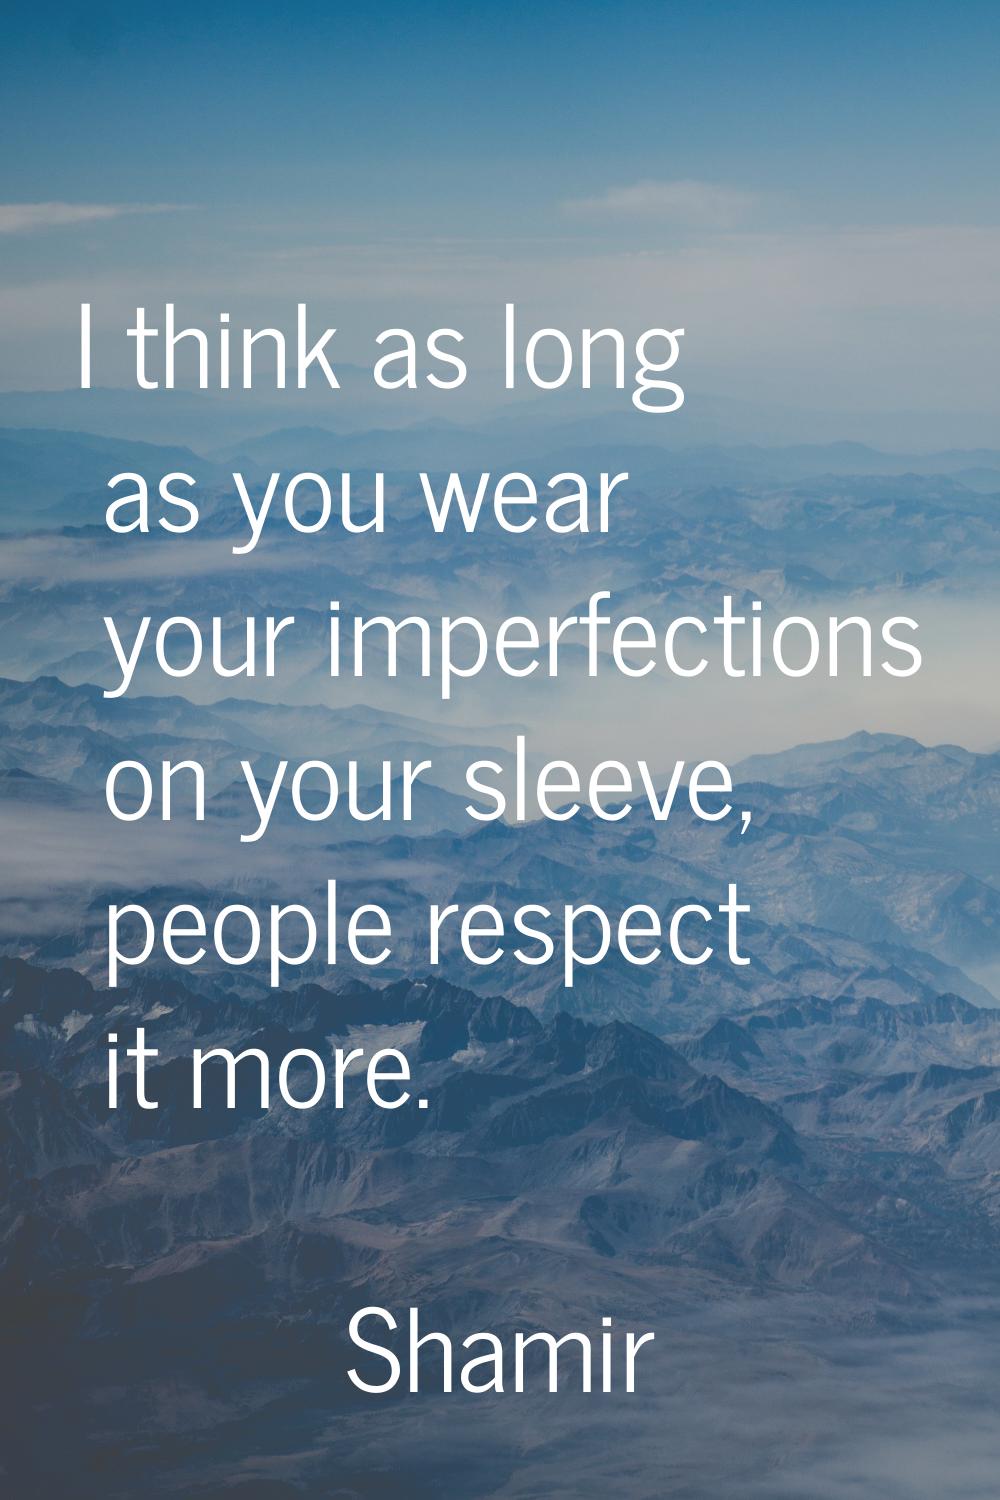 I think as long as you wear your imperfections on your sleeve, people respect it more.